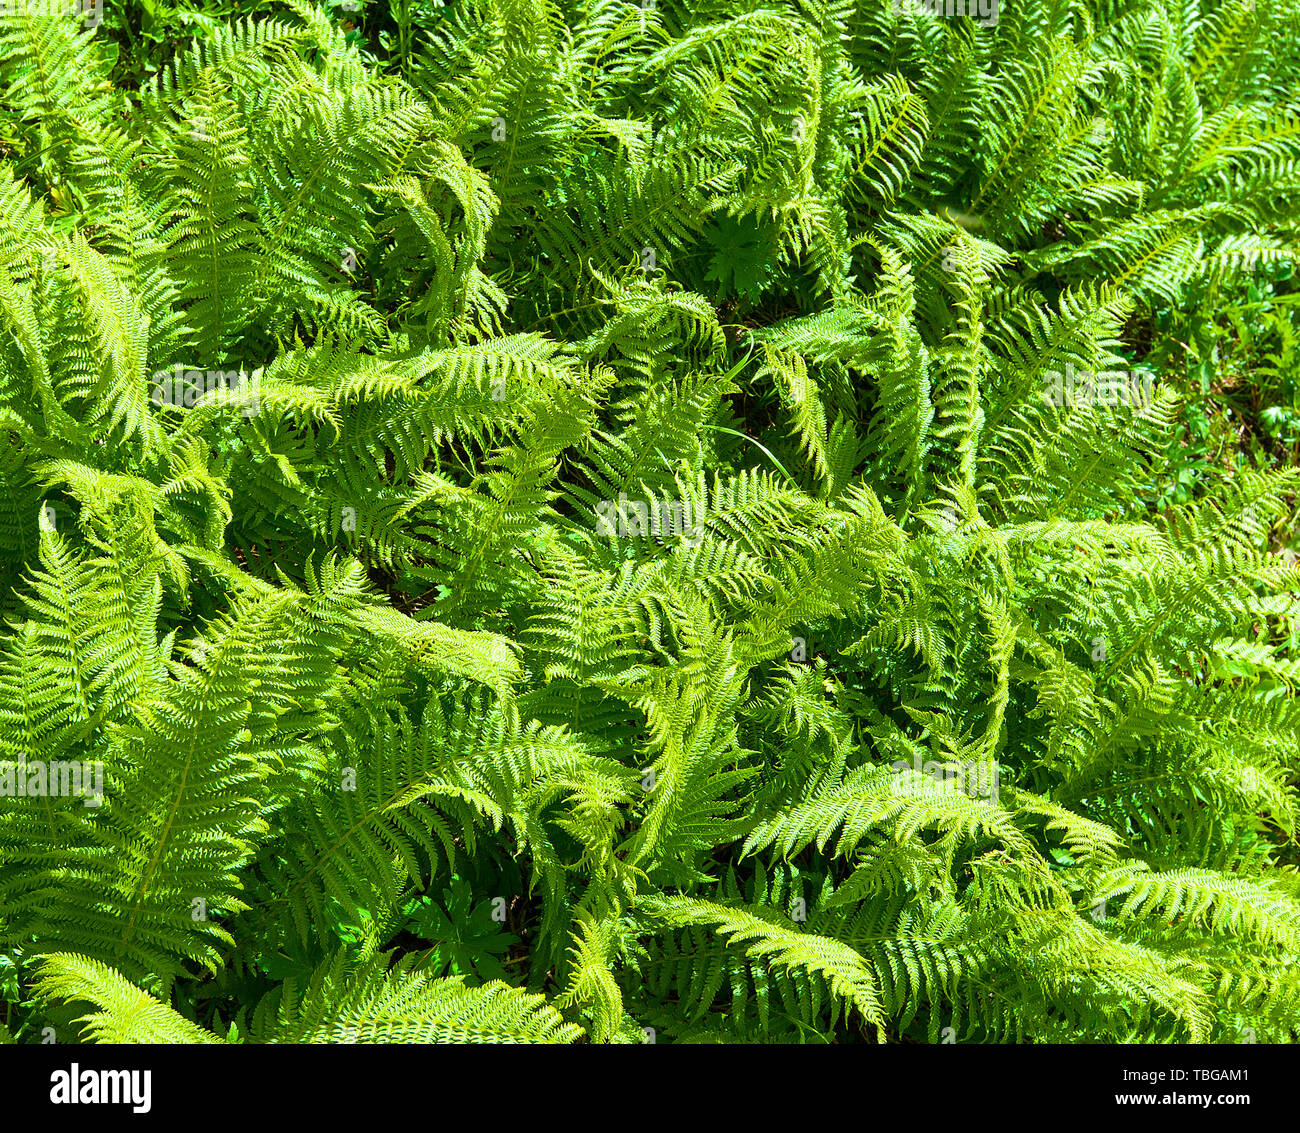 Nephrolepis exaltata (The Sword Fern) - a species of fern in the family Lomariopsidaceae Stock Photo